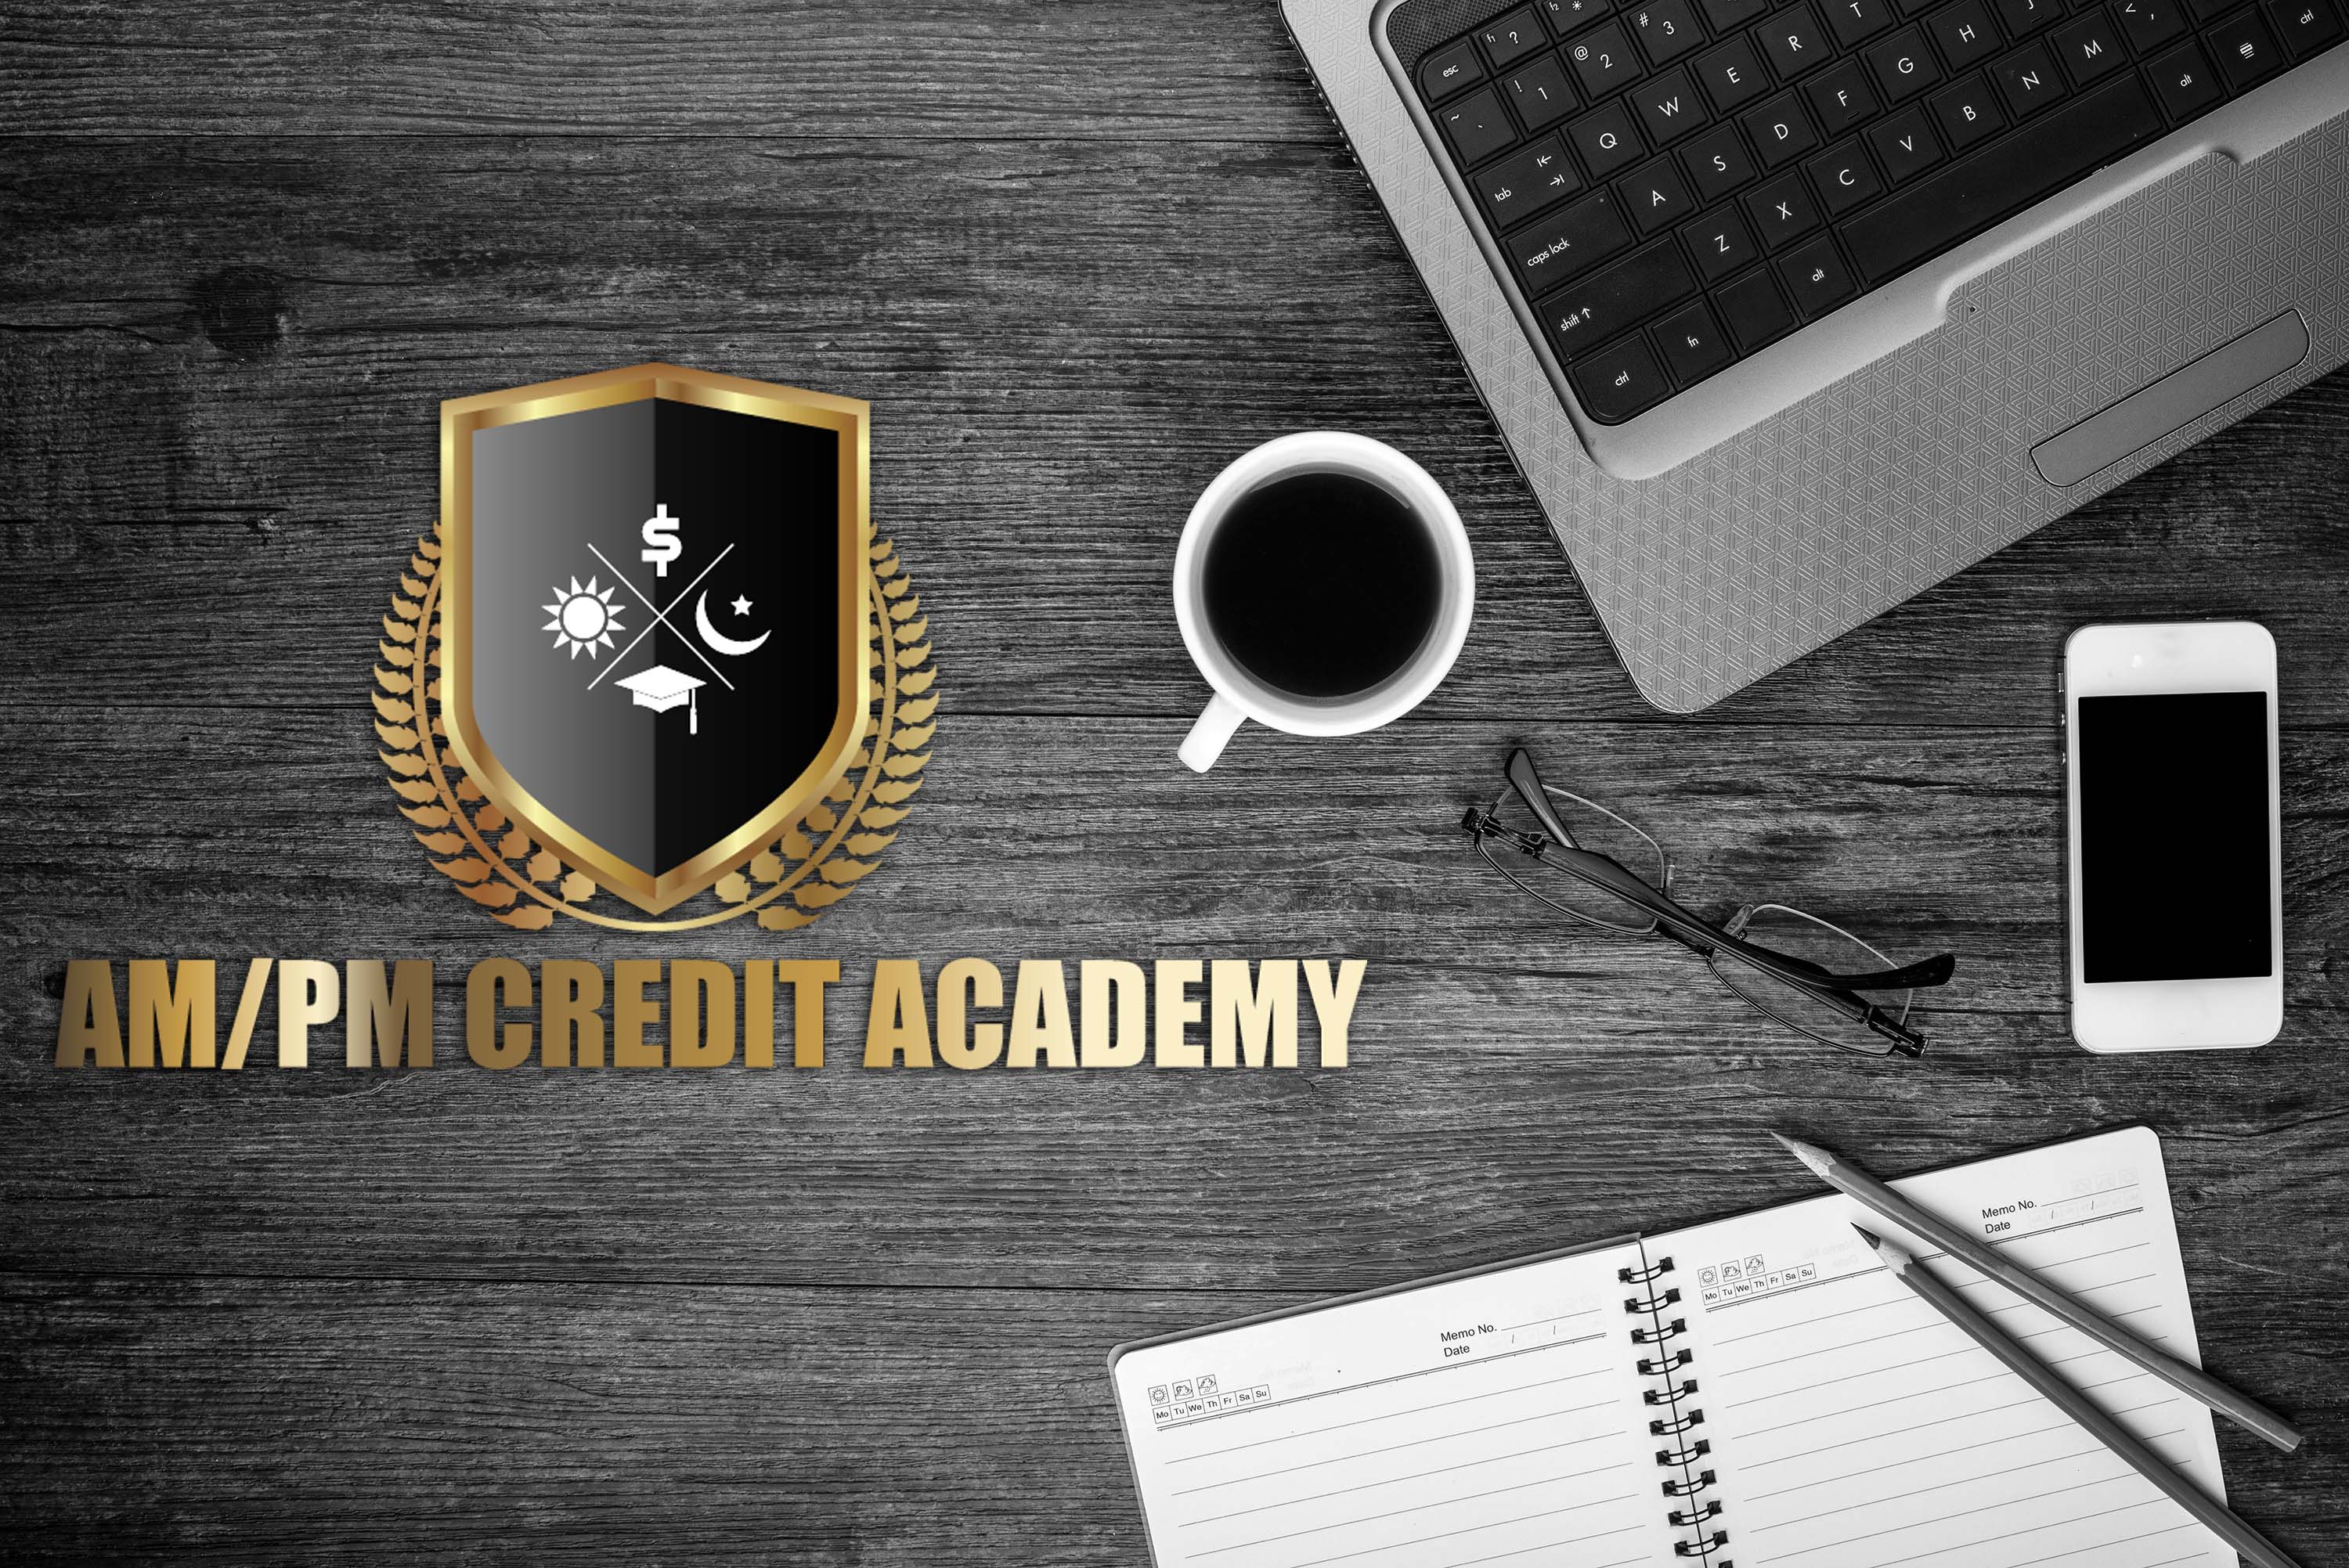 The AM/PM Credit Academy | Digital Course Recipe